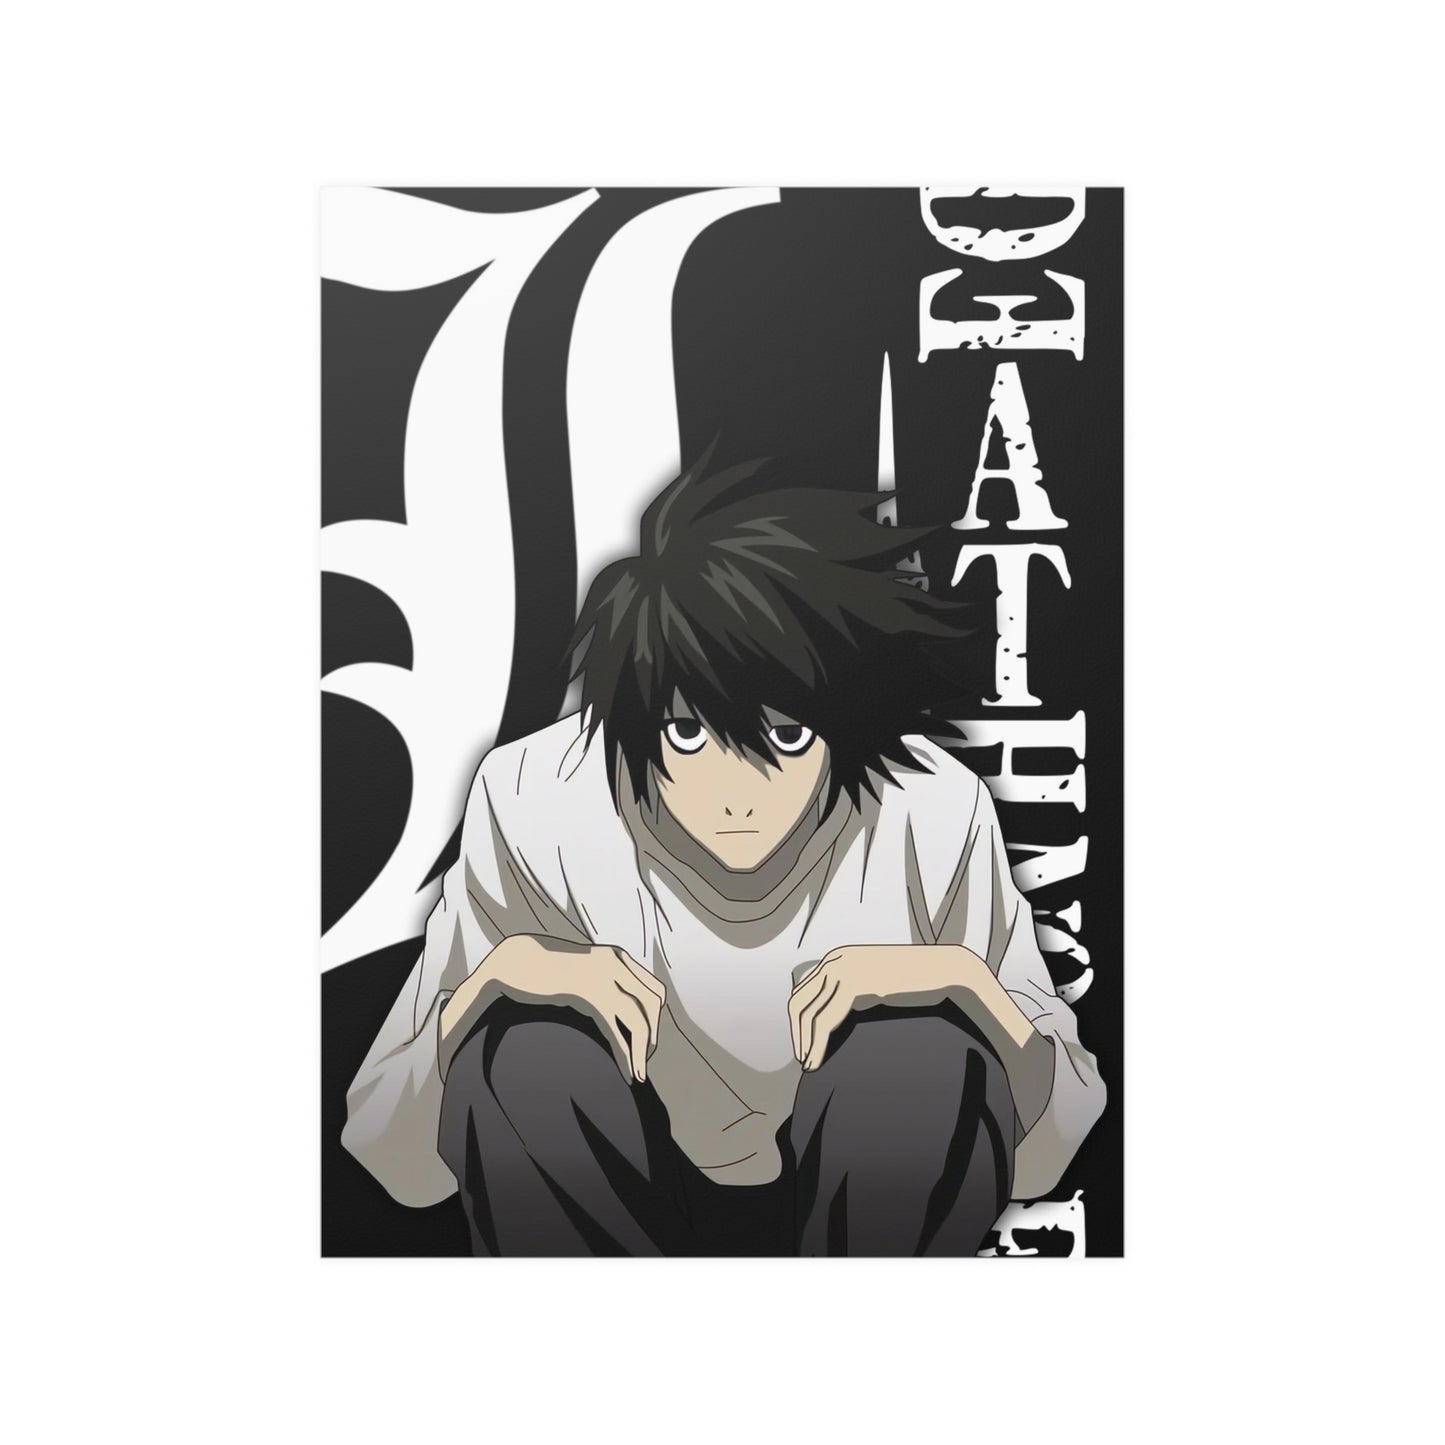 L Death Note Poster.